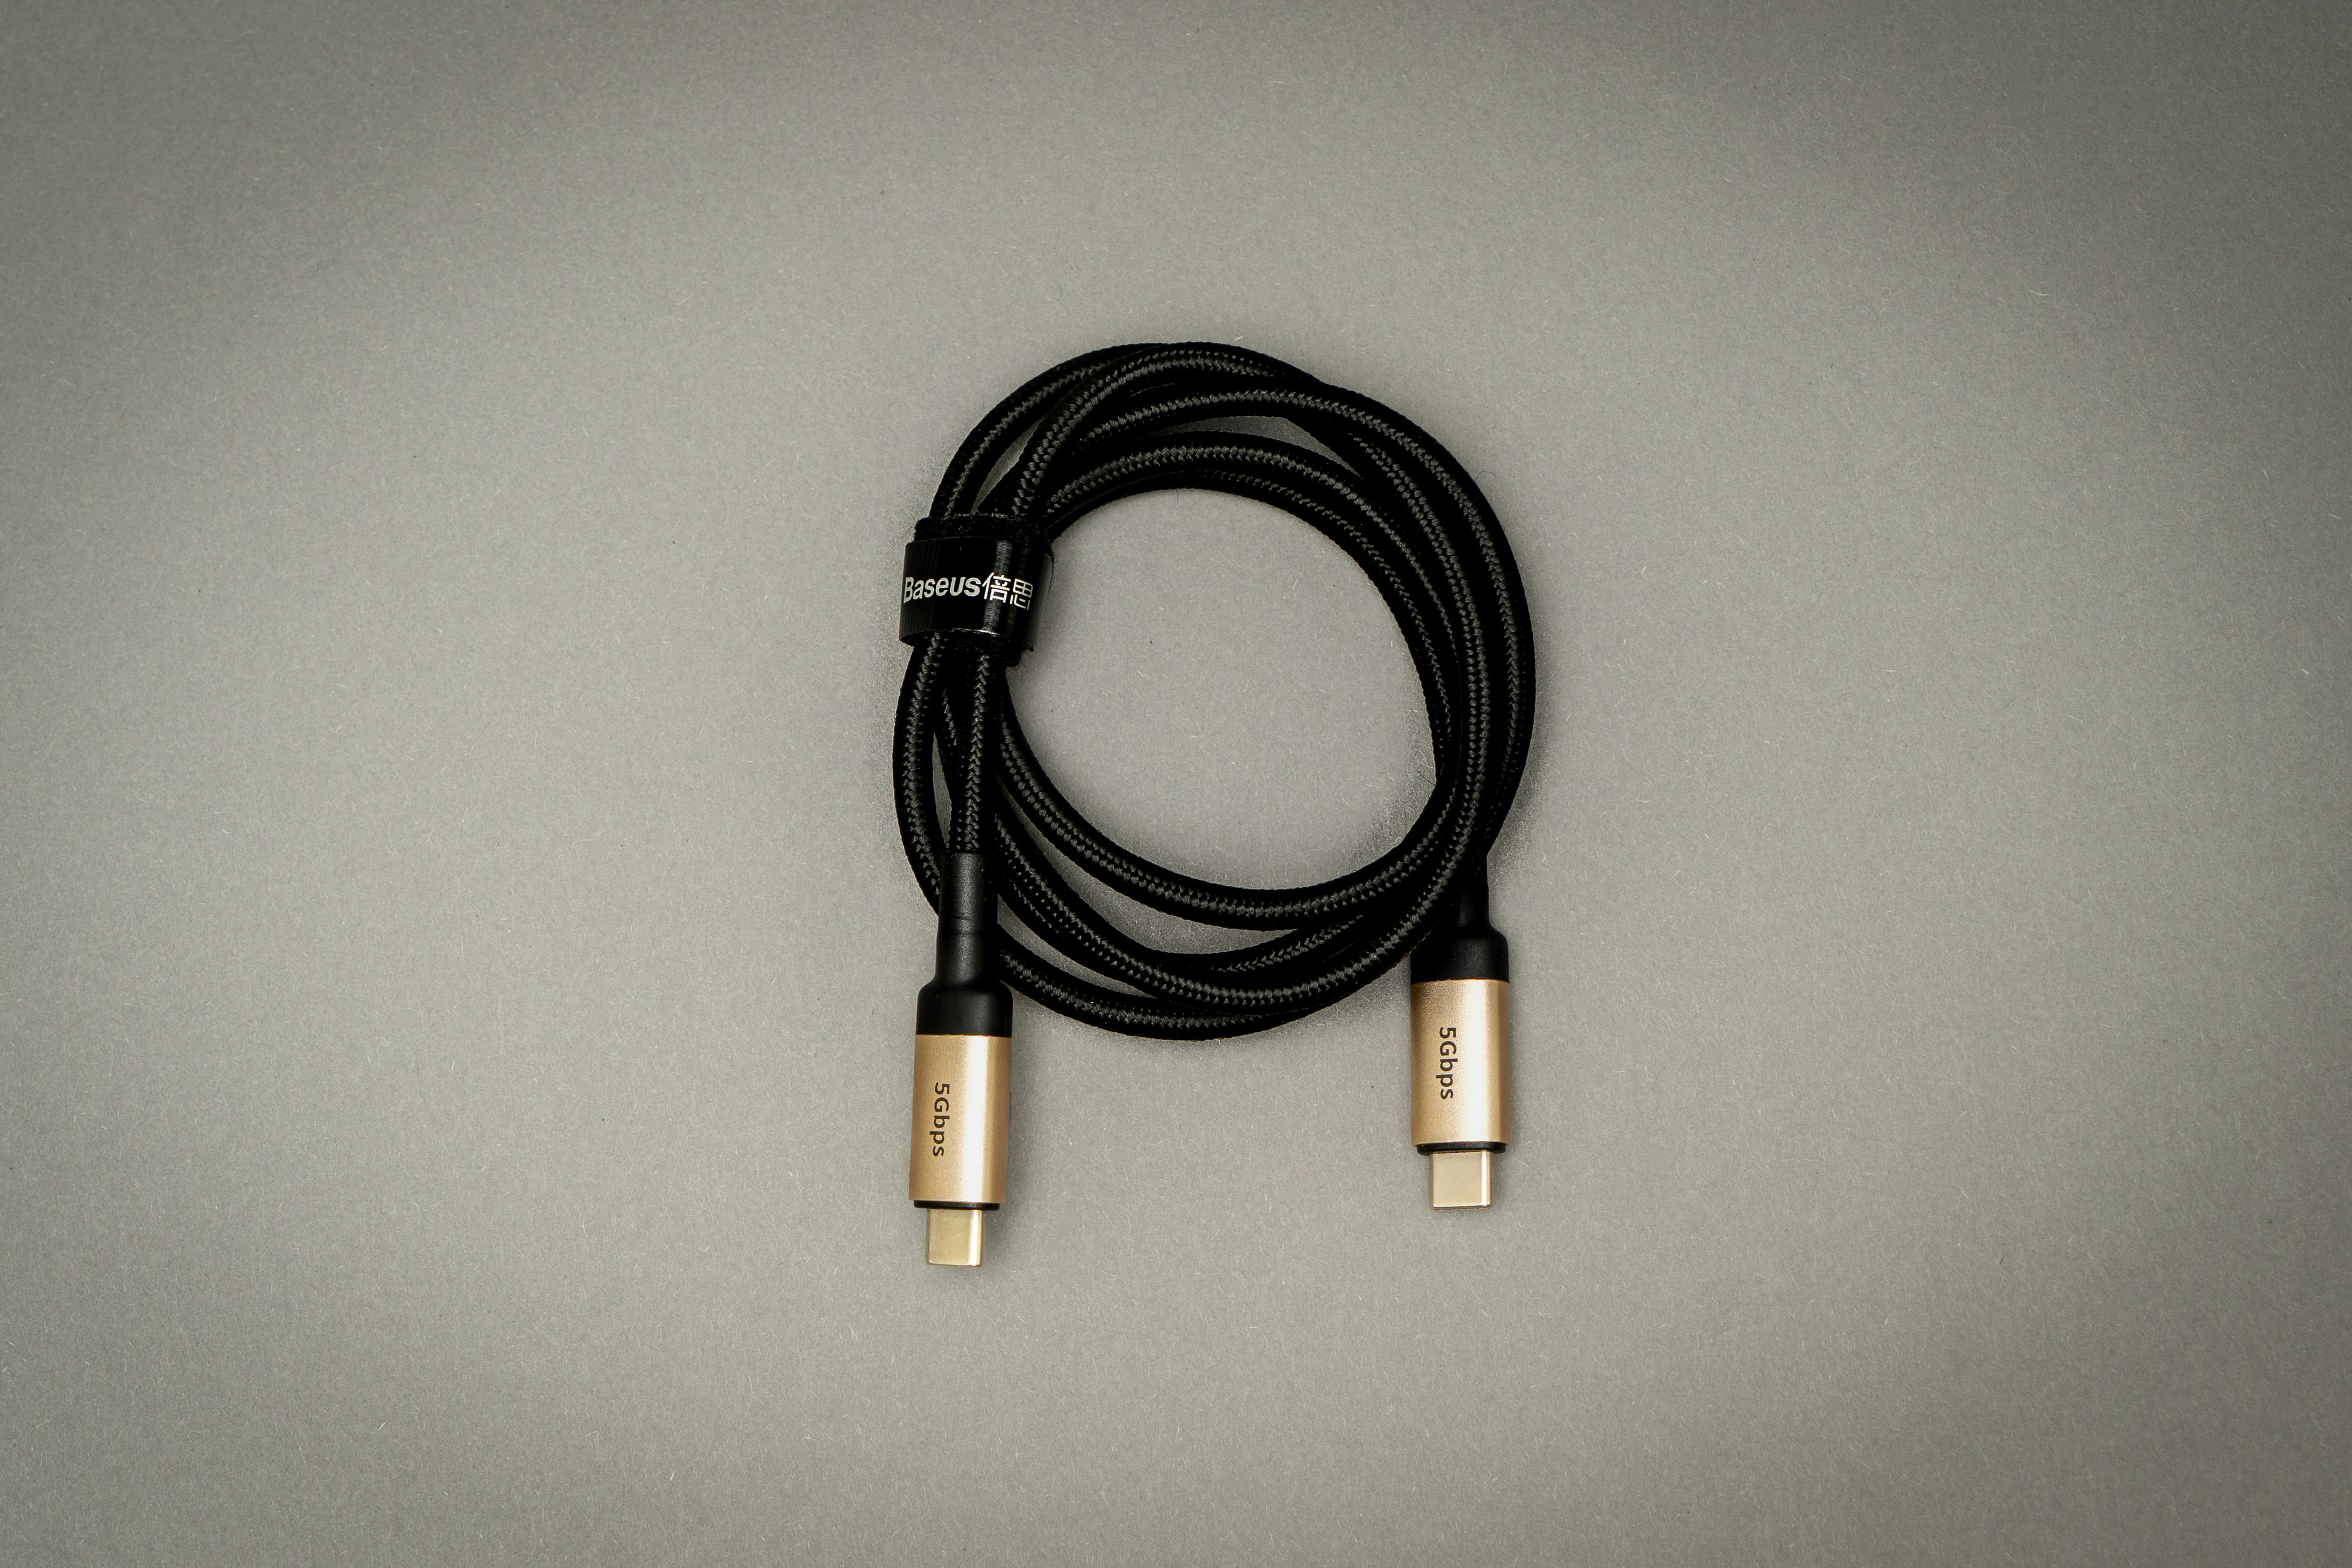 A one meter USB-C cable by Baseus. It has data lines and can carry display signals as well as USB, sound, etc.